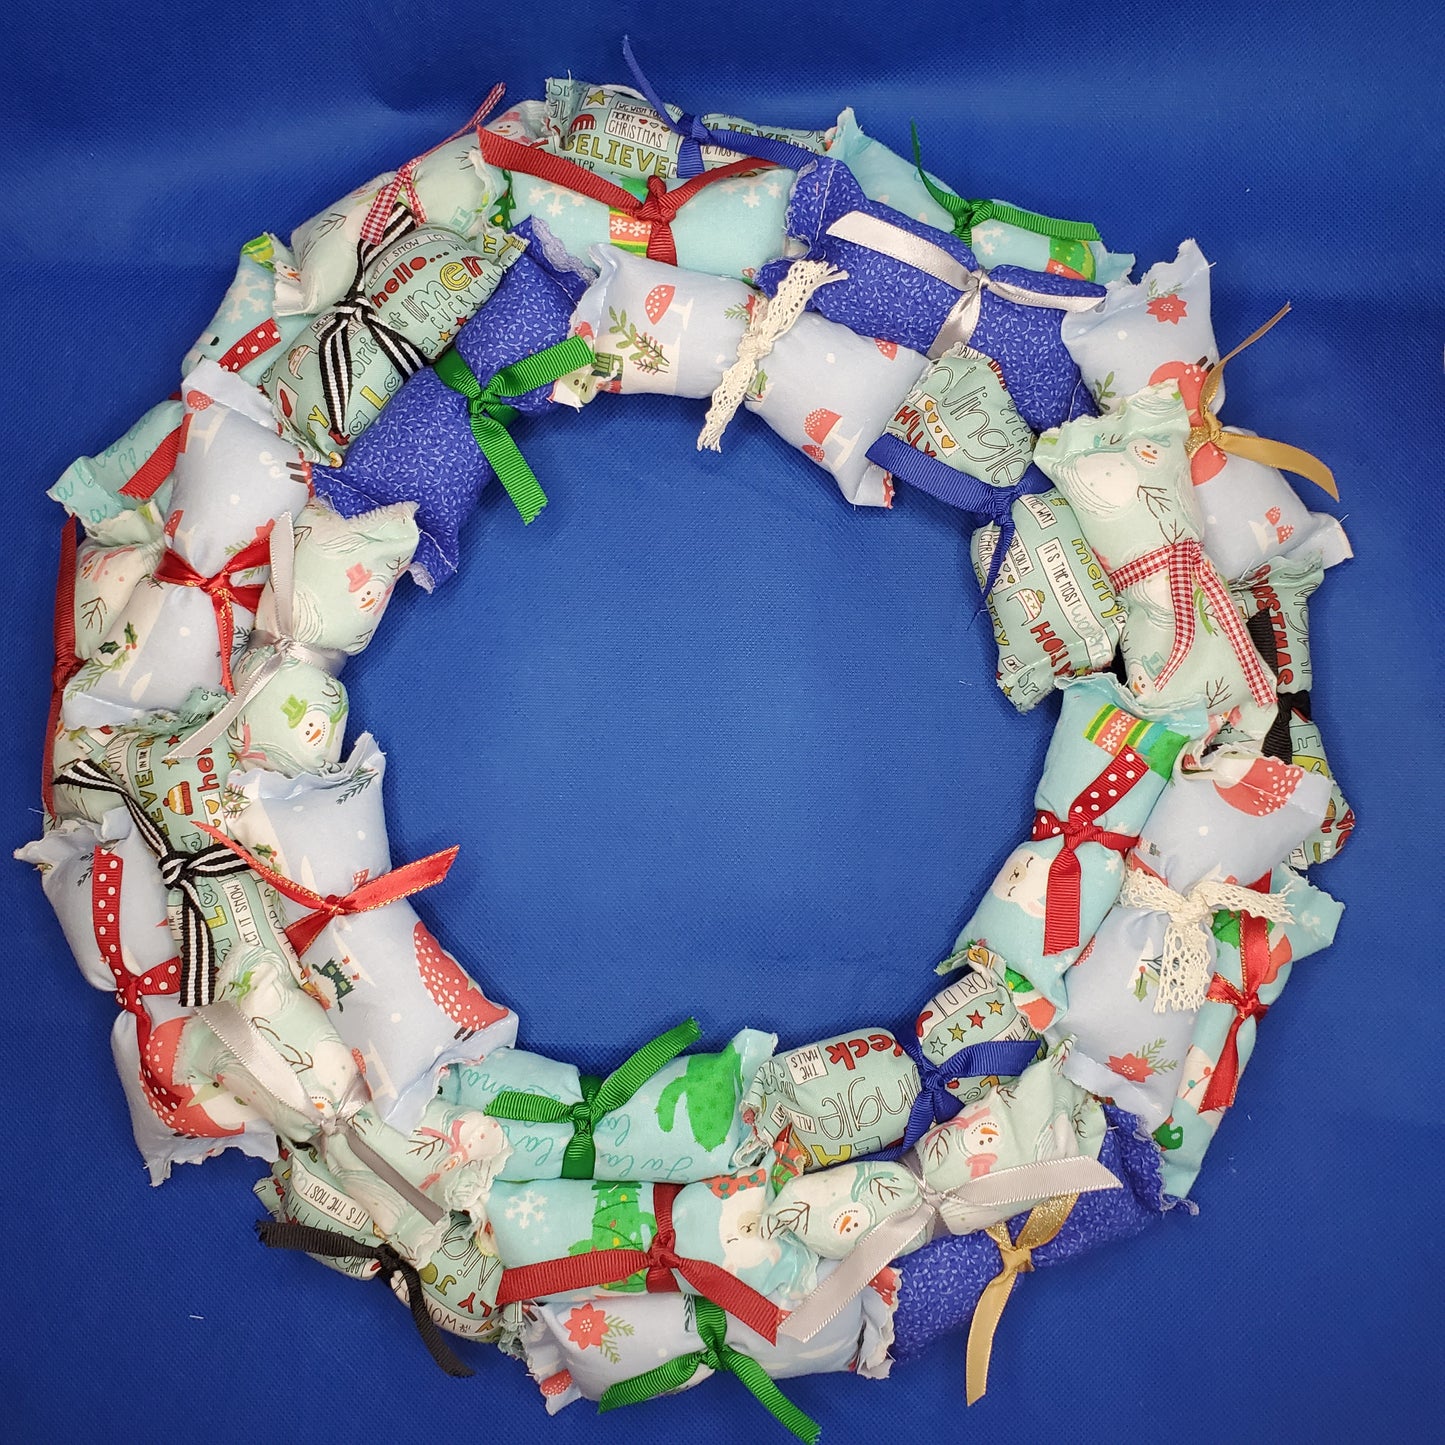 Holiday Wreaths / Home Decor - Several Options Available